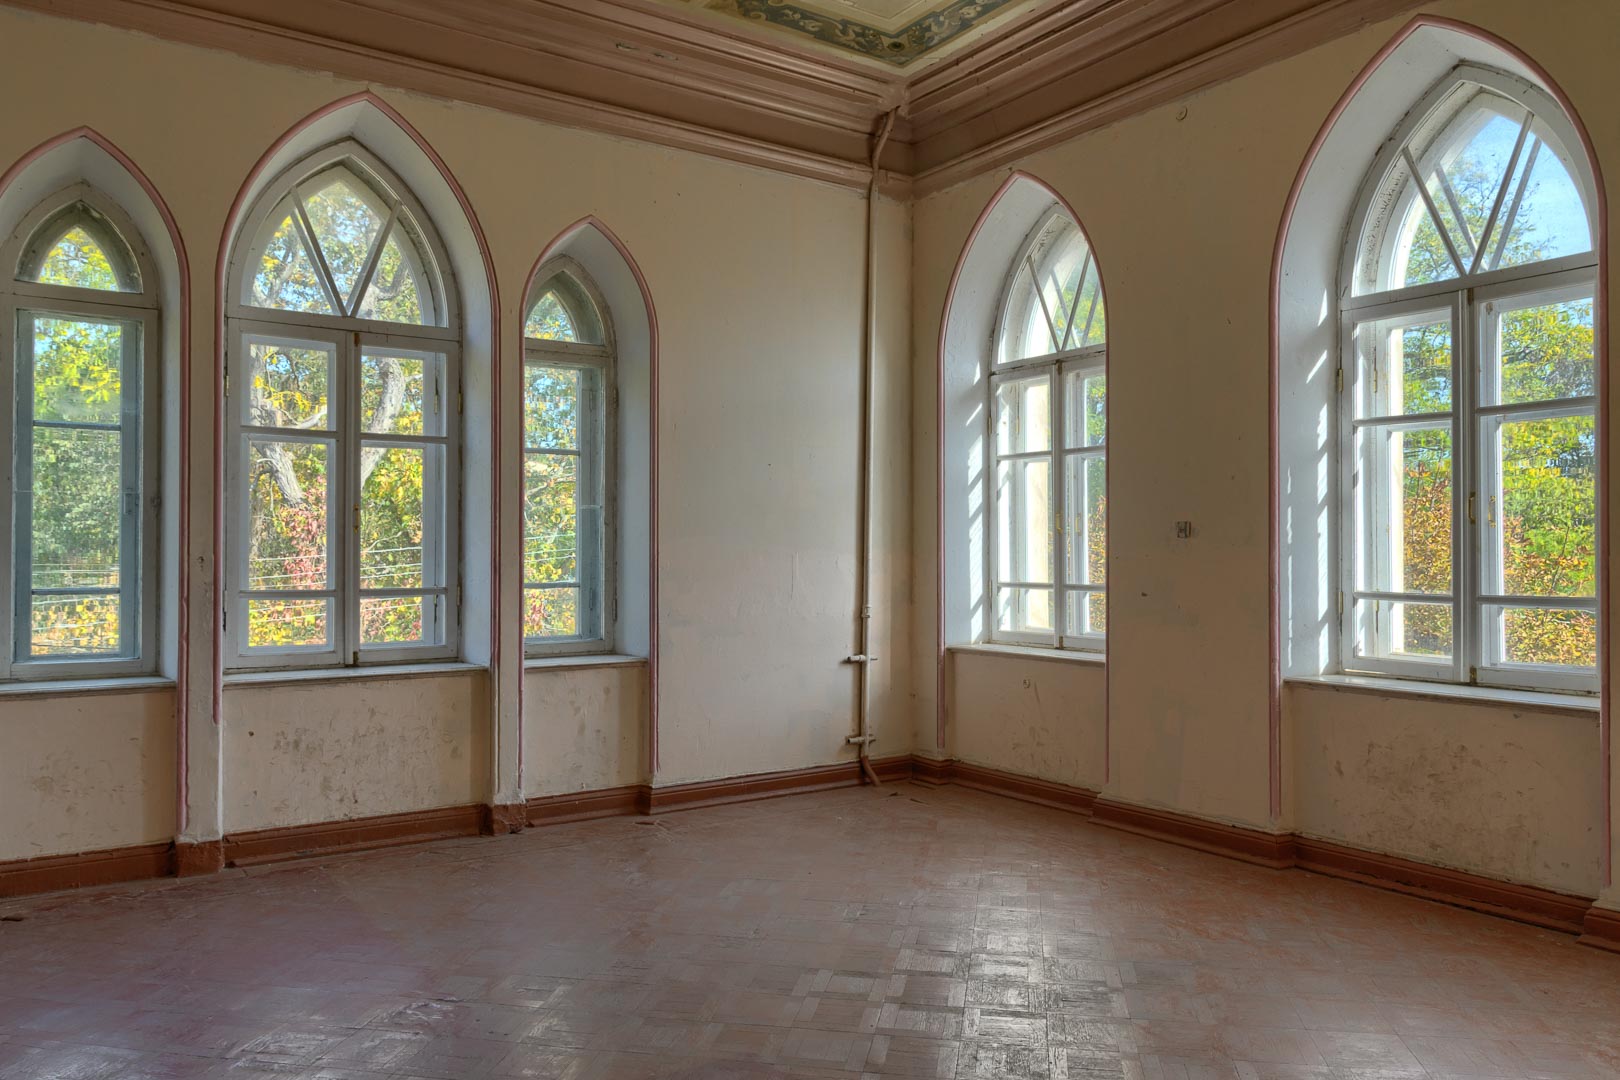 Backplate • ID: 9386 • HDRI Haven - Palace Room With Worn Floor